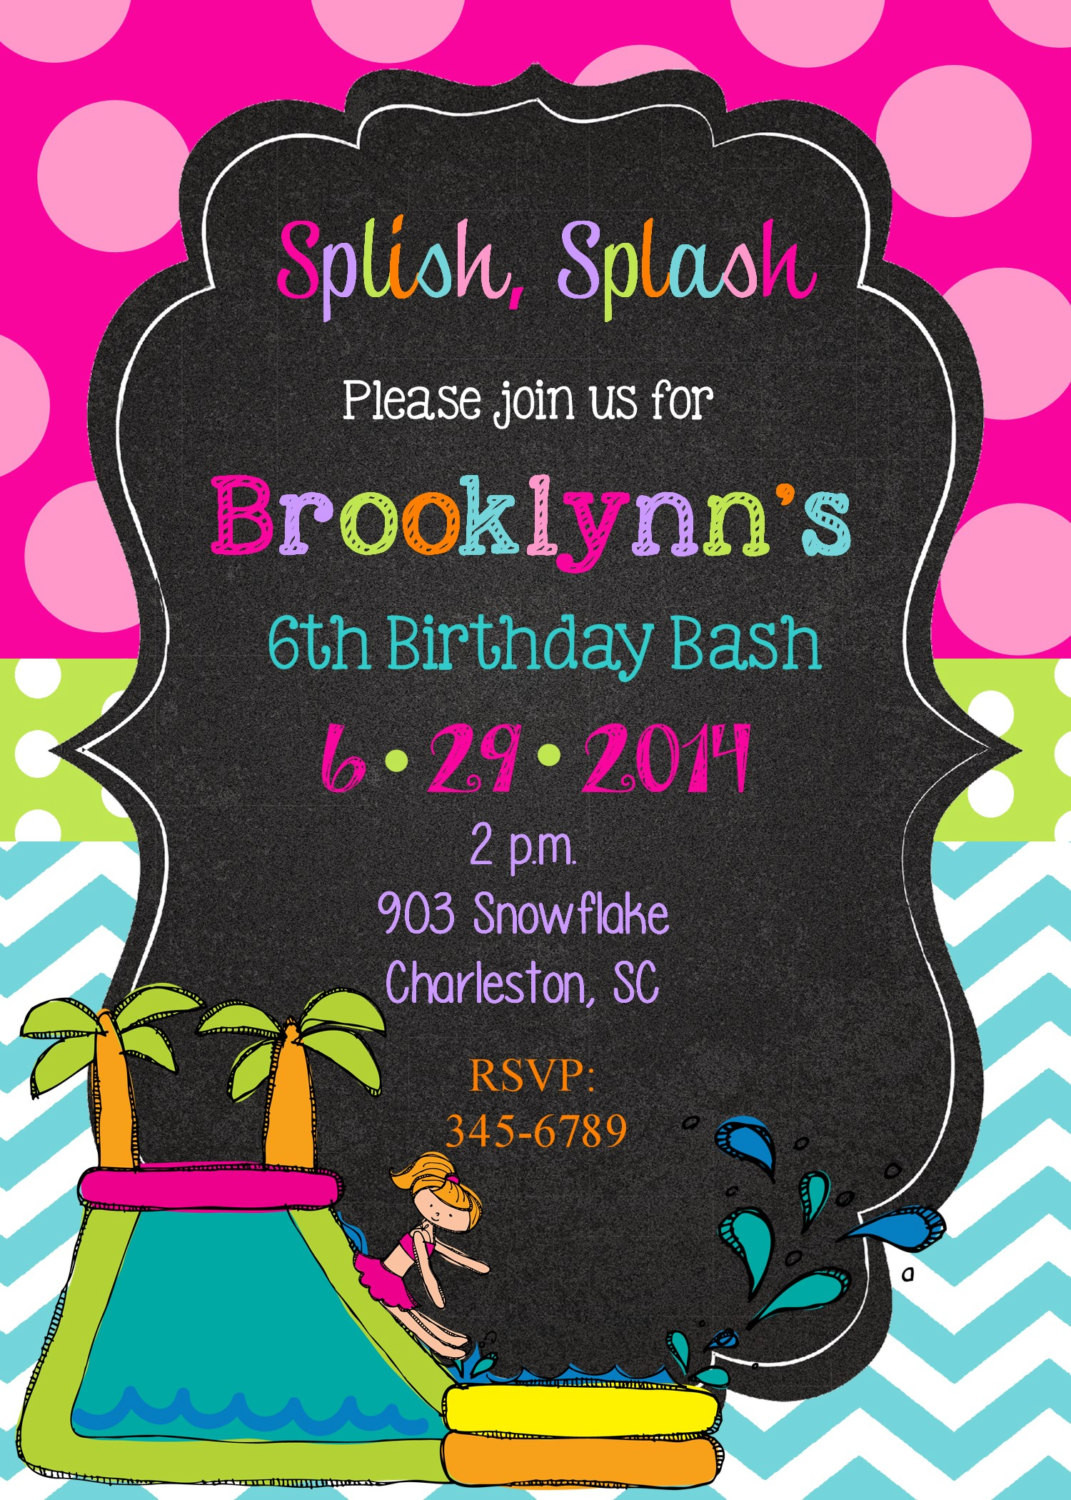 Water Slide Birthday Party Invitations
 Water Slide Party Birthday Party invitations printable or